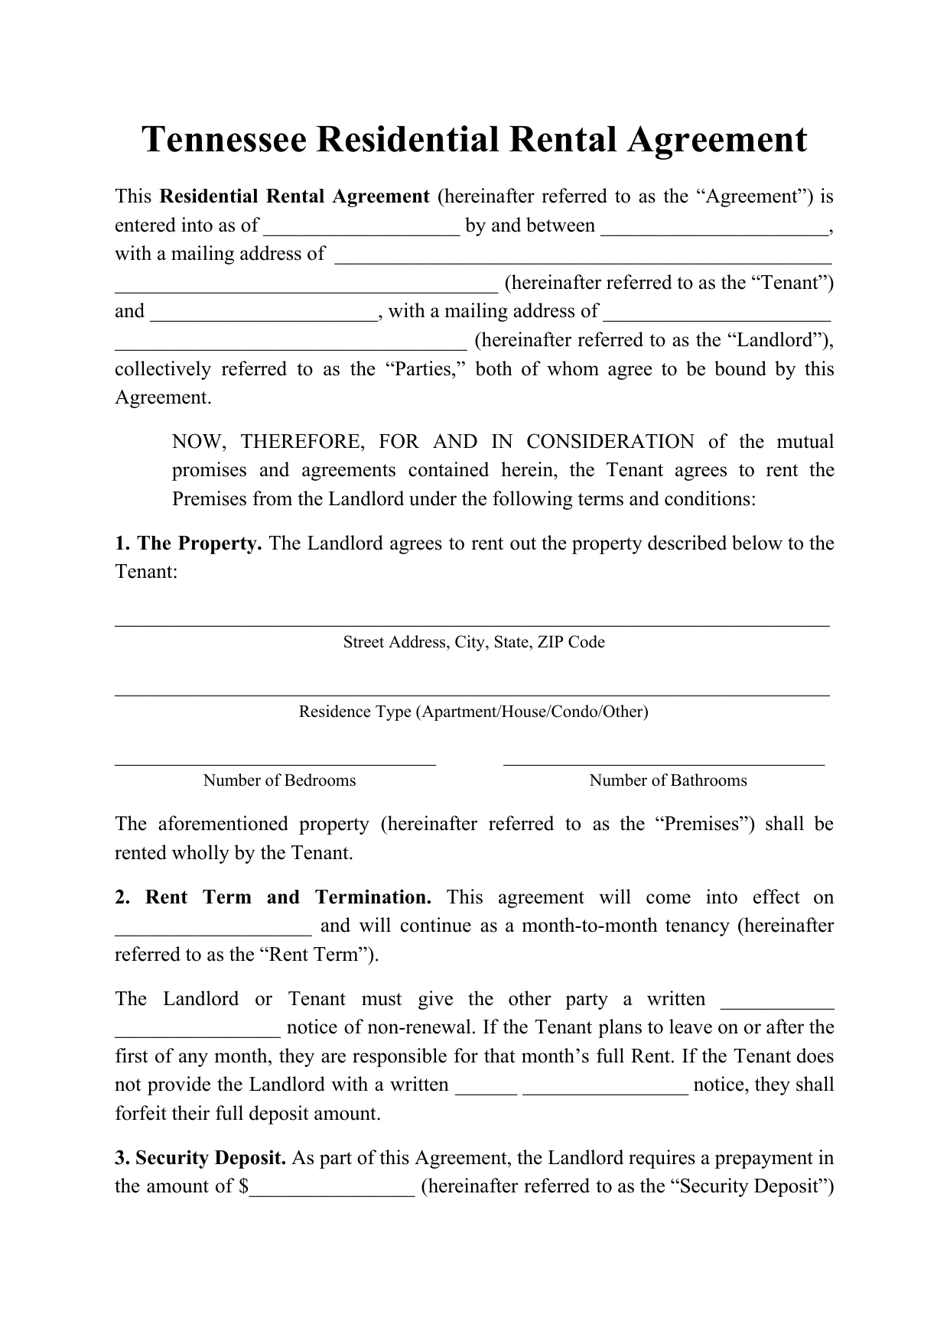 Residential Rental Agreement Template - Tennessee, Page 1